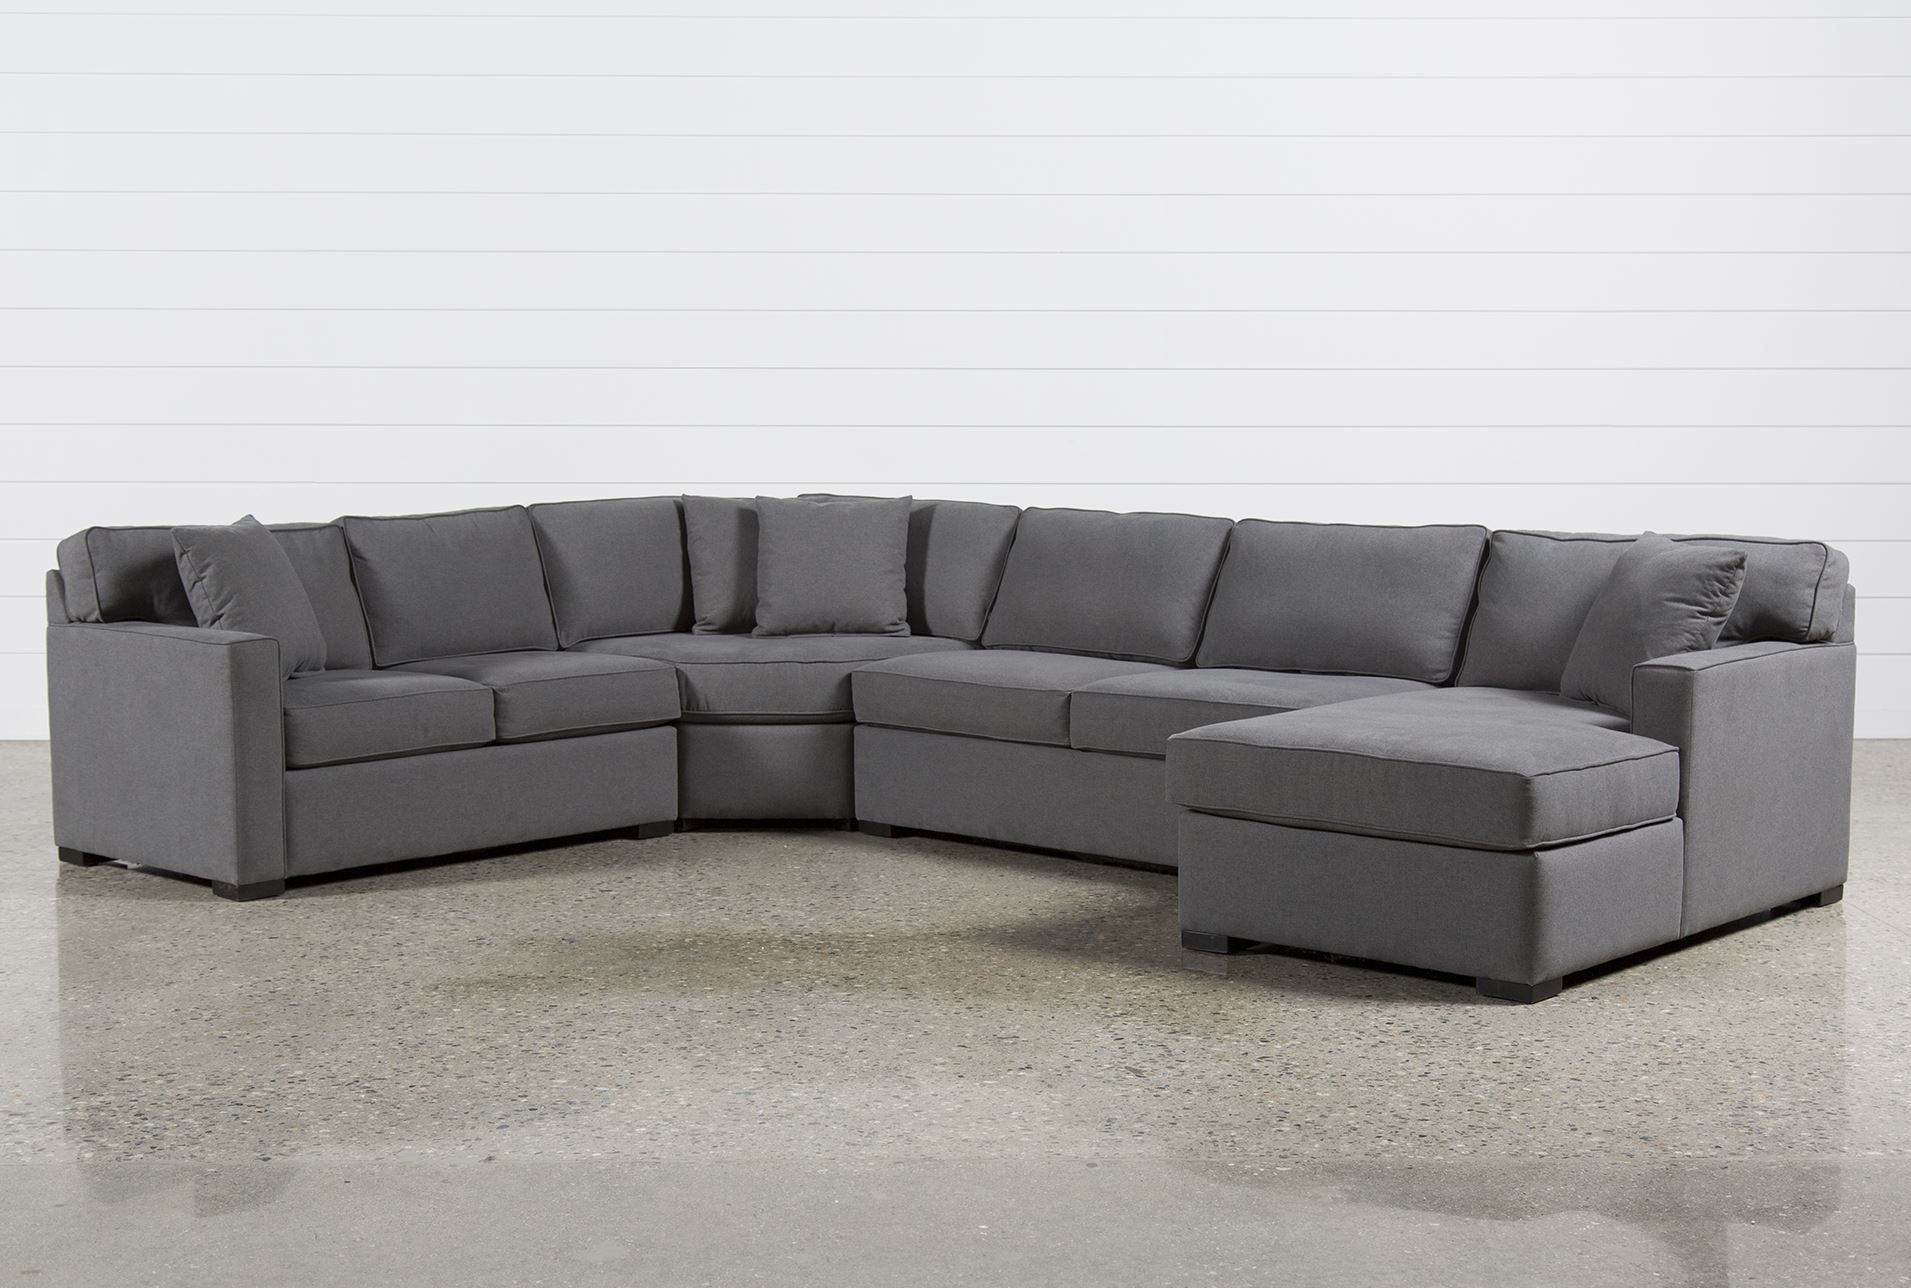 Stunning 45 Degree Sectional Sofa 50 In Motion Sectional Sofas With Regard To 45 Degree Sectional Sofa (View 3 of 15)